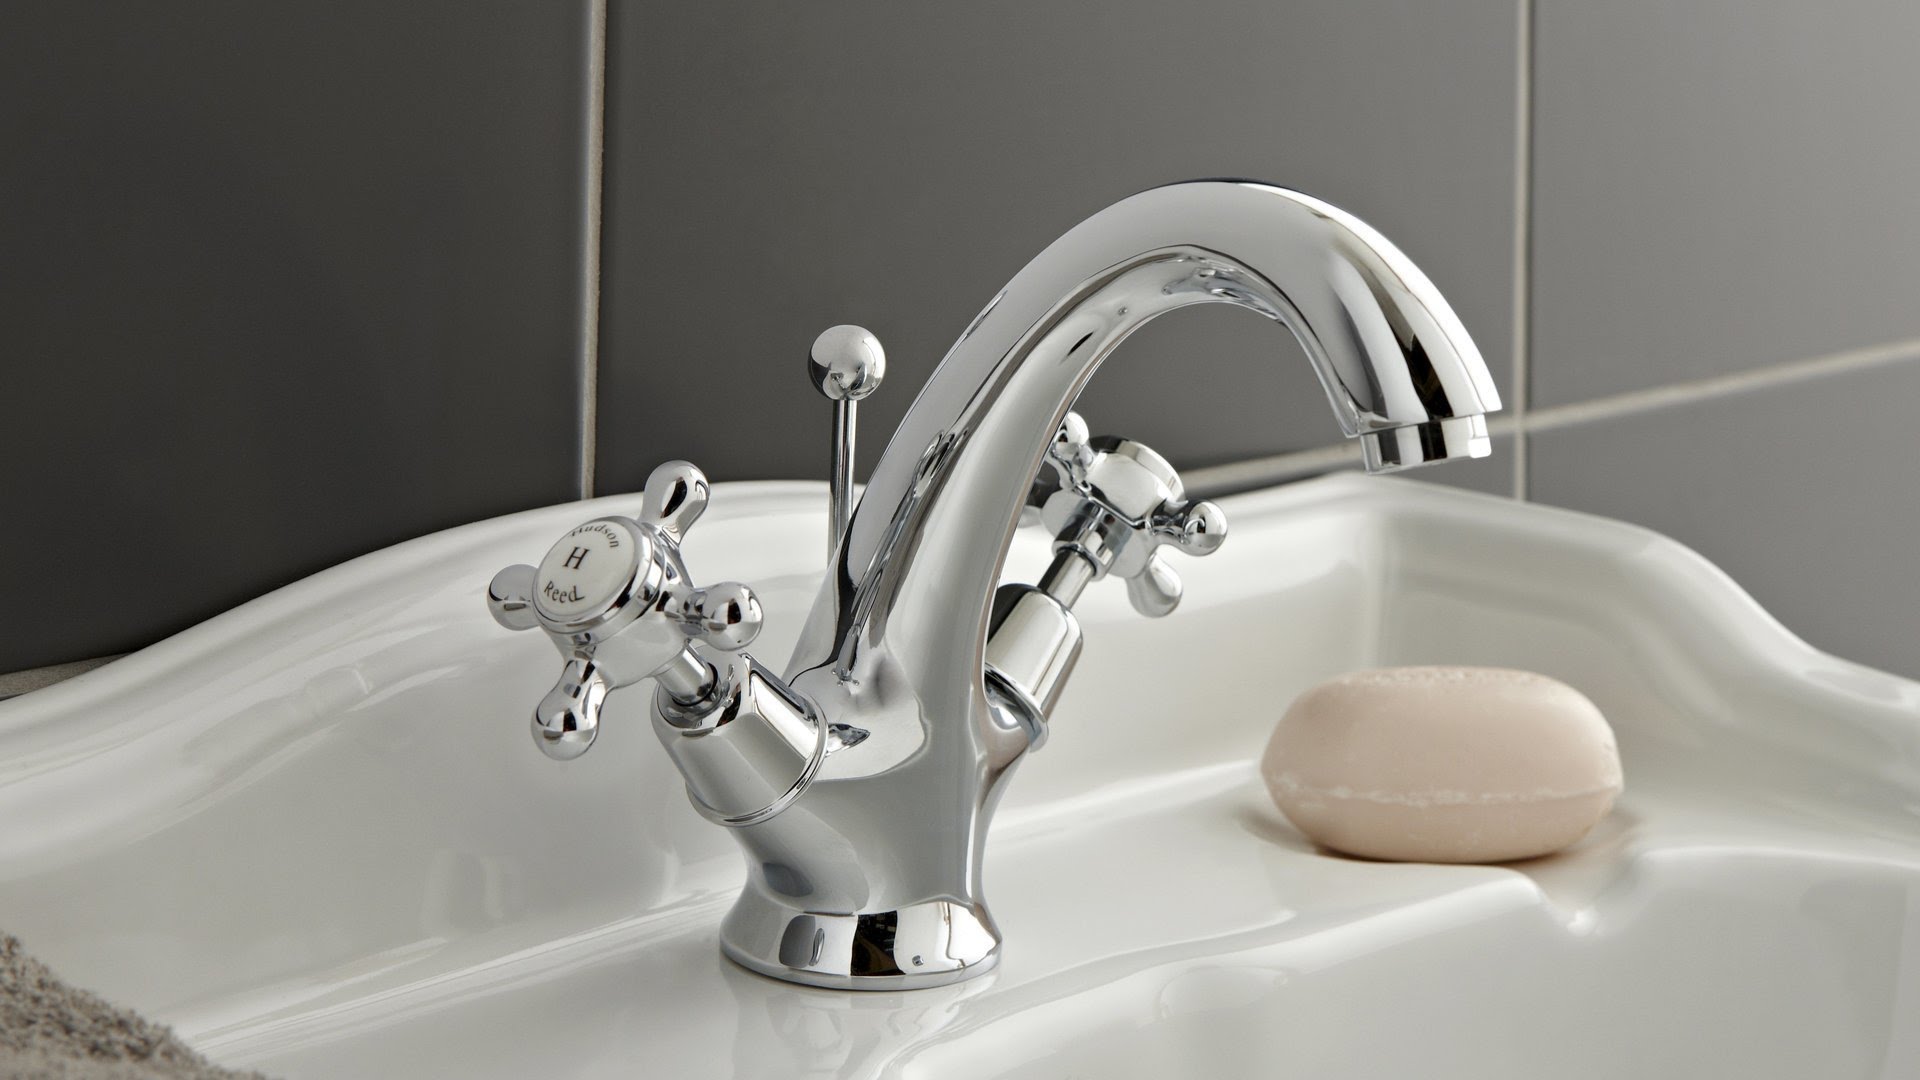 Which Brand is Best for Bathroom Faucets